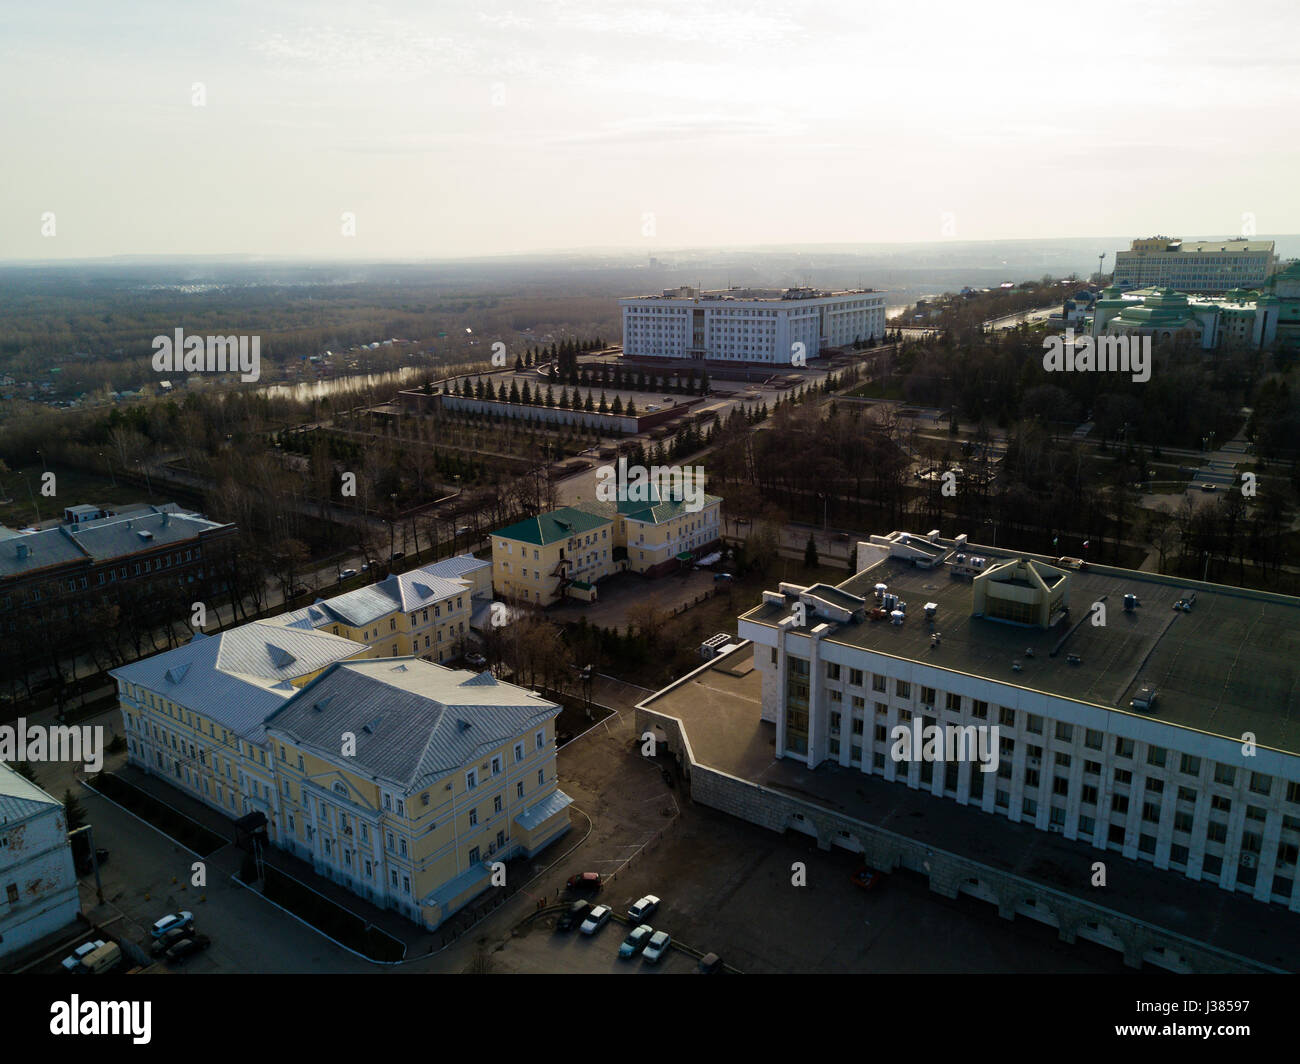 The cultural center of Ufa city. Aerial view Stock Photo